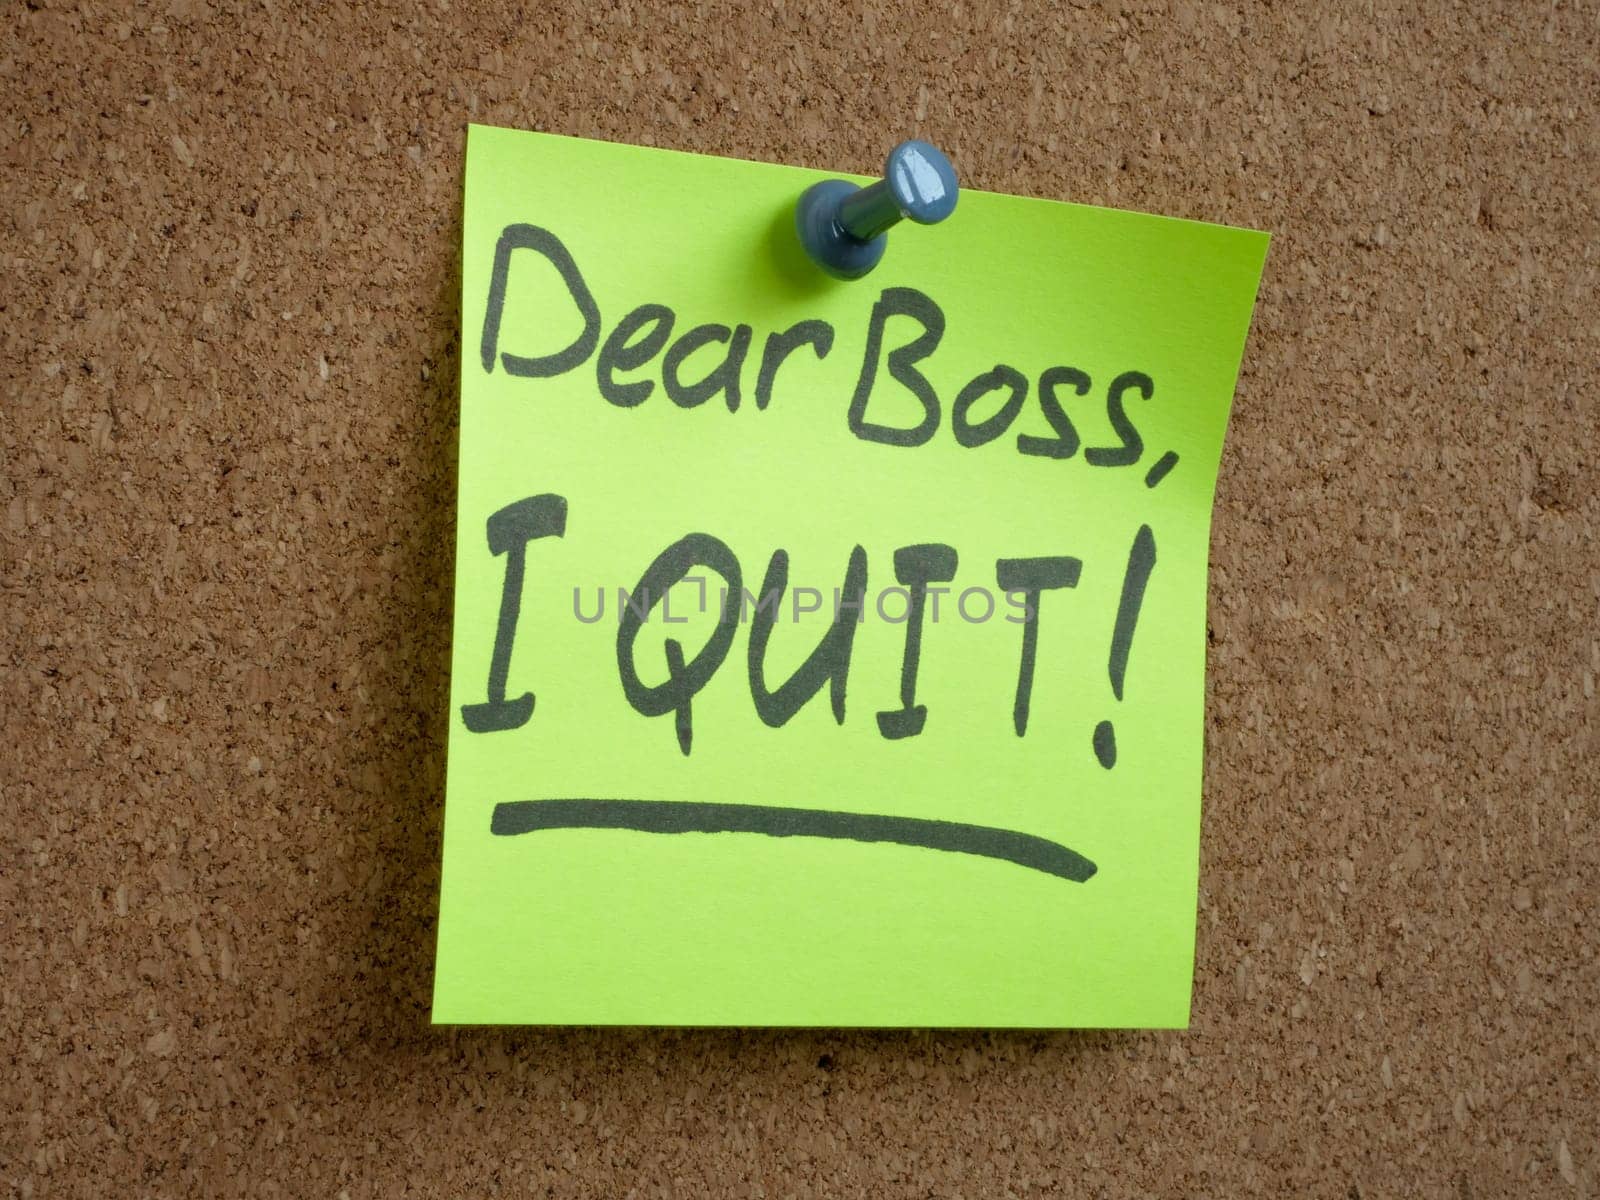 Sticker with the inscription Dear boss, I quit. Employee quits concept.